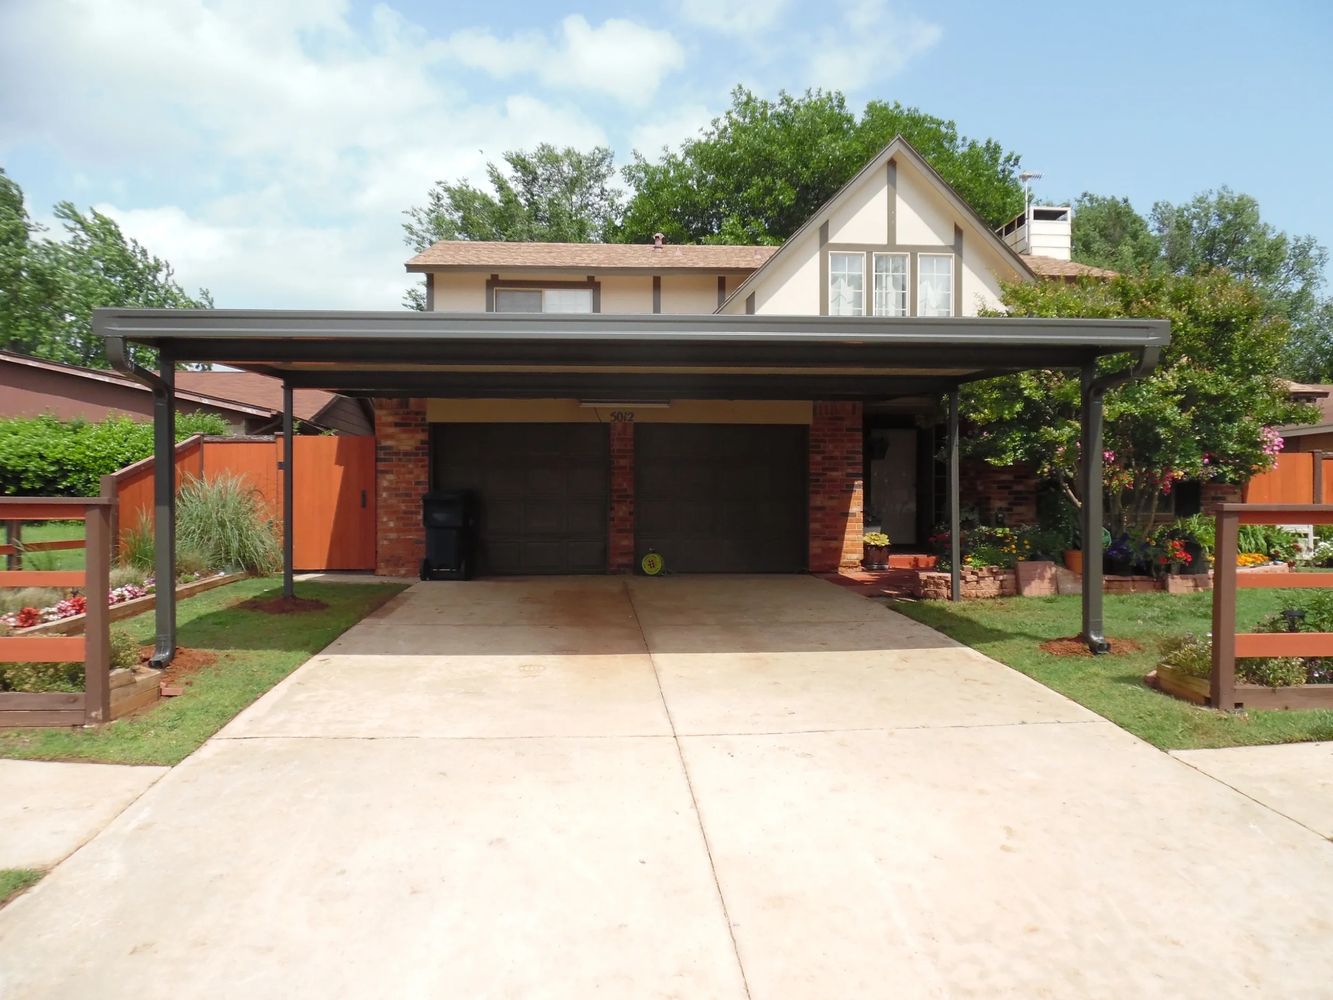 24ft x 24ft Oversized 2-1/2 car attached Flat-pan aluminum carport with built-in guttering bronze.